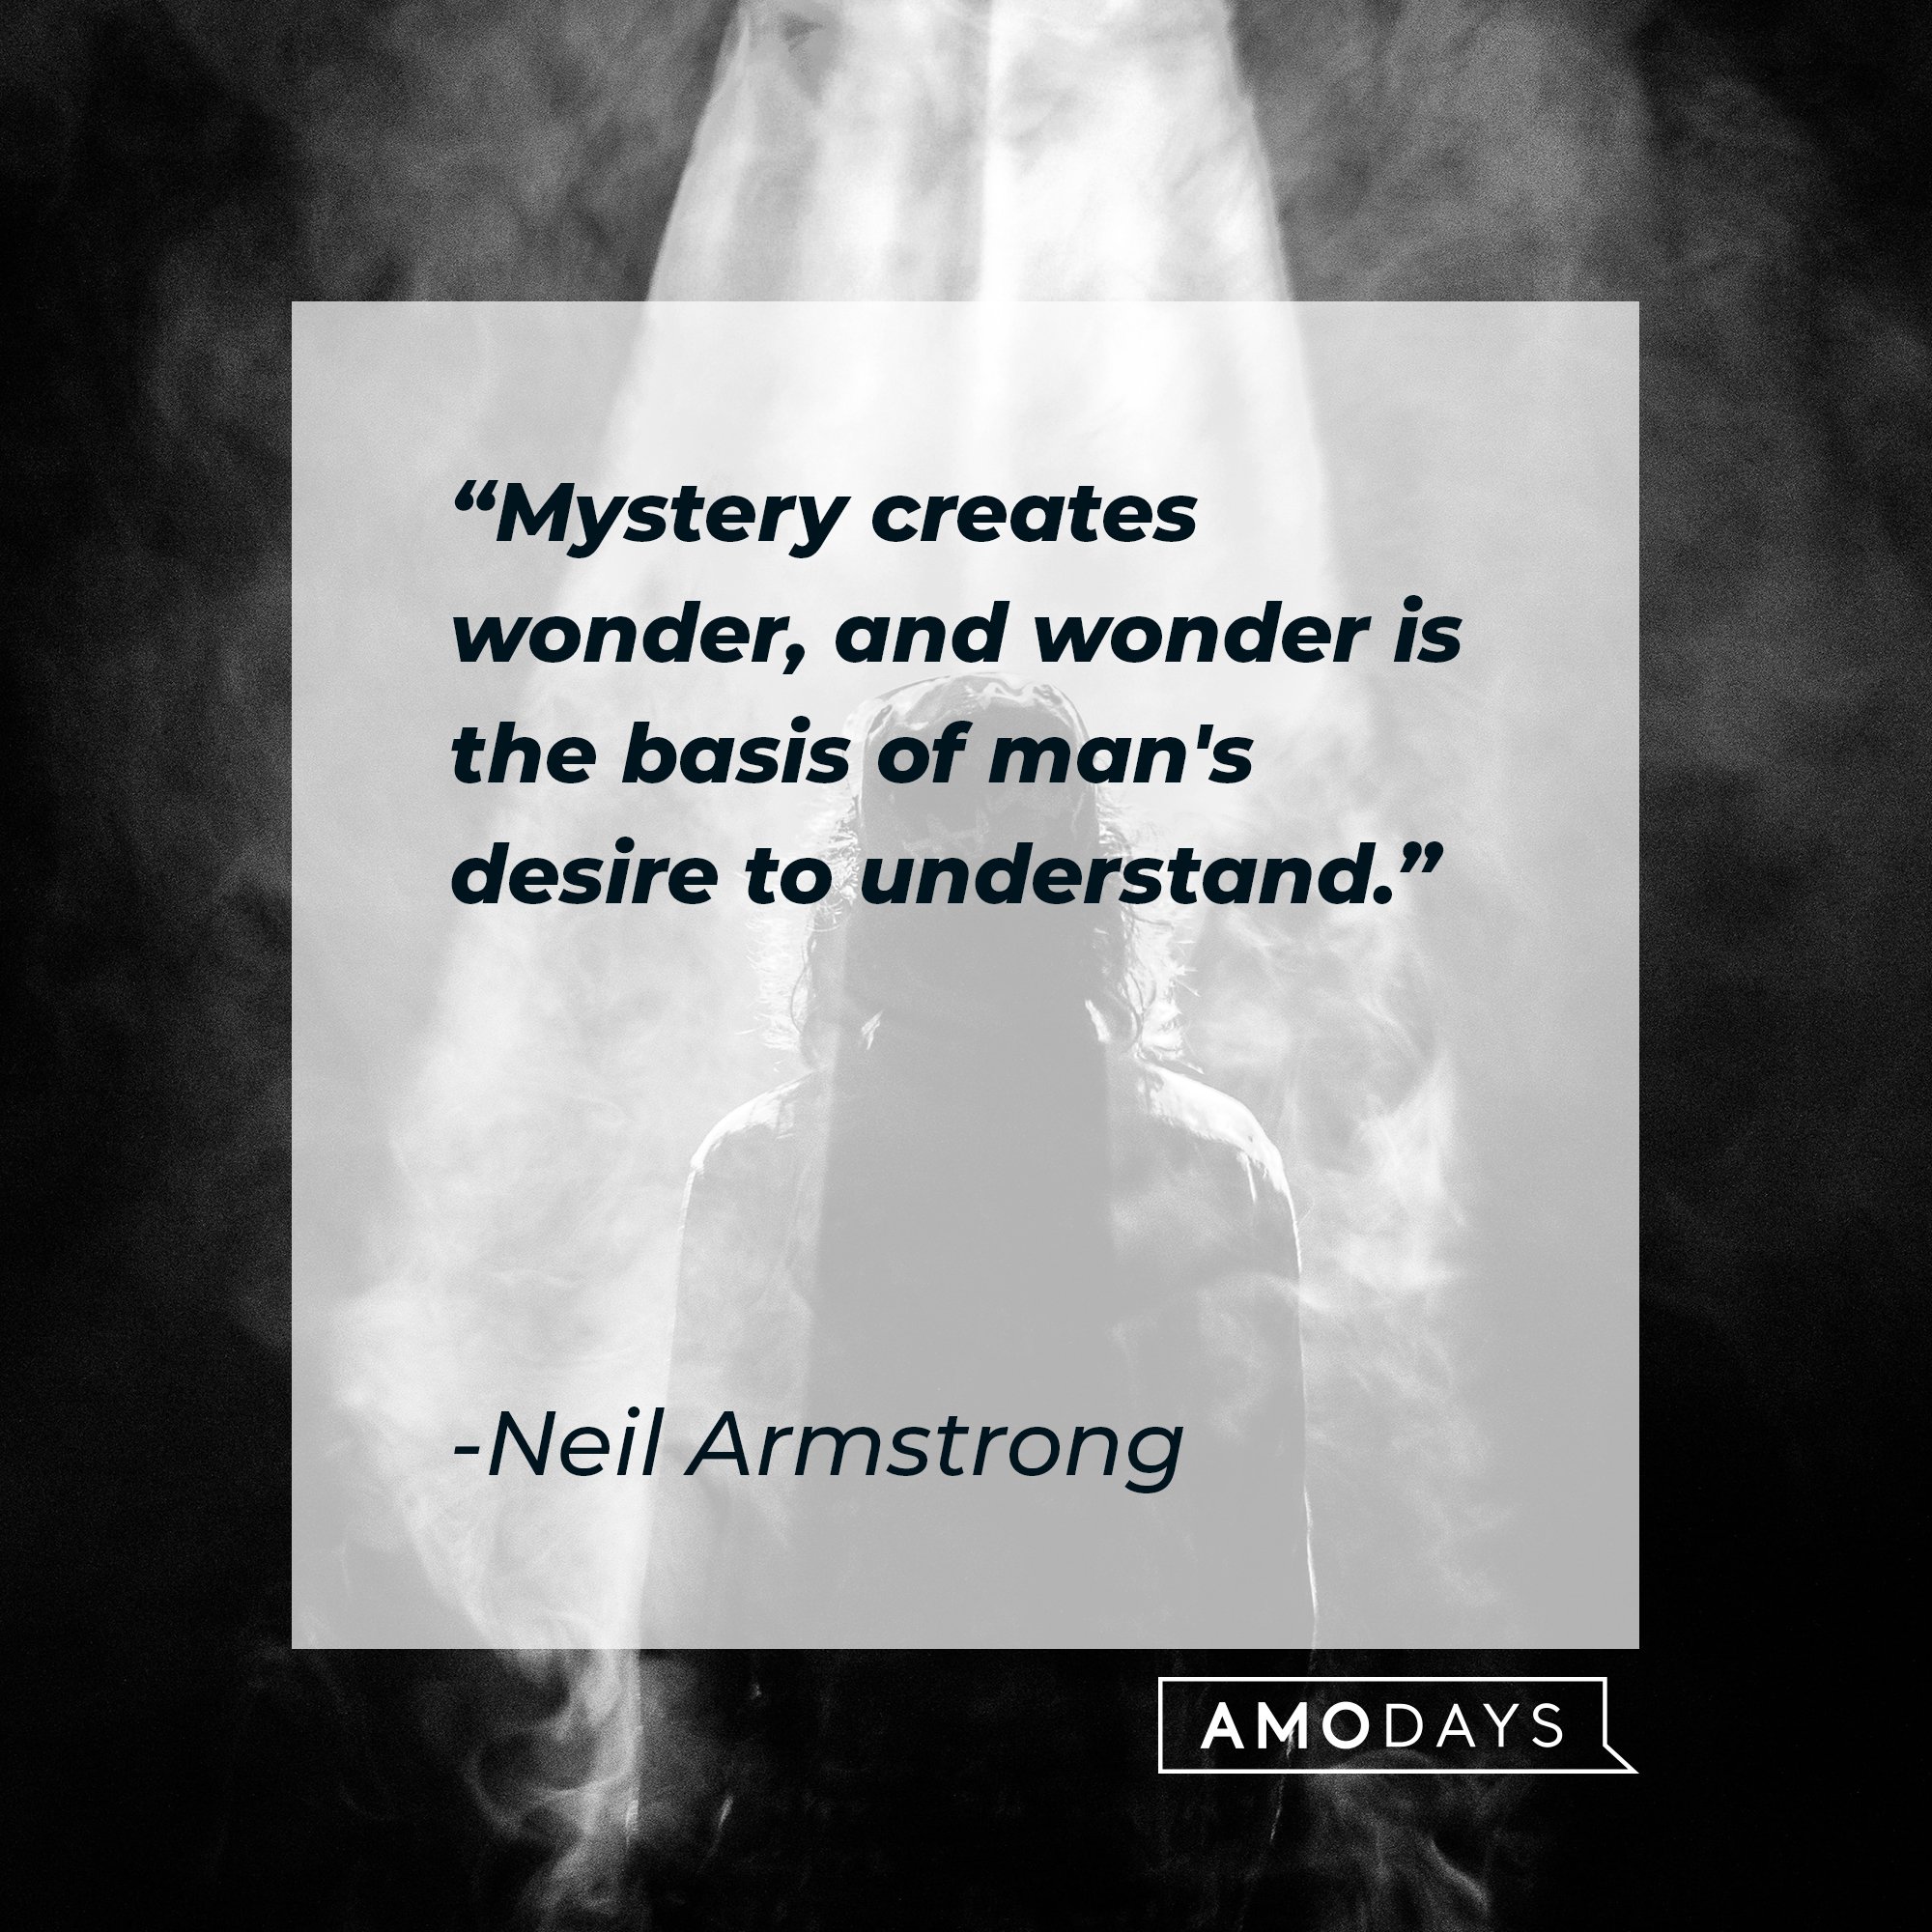 Neil Armstrong’s quote: "Mystery creates wonder, and wonder is the basis of man's desire to understand." | Image: AmoDays